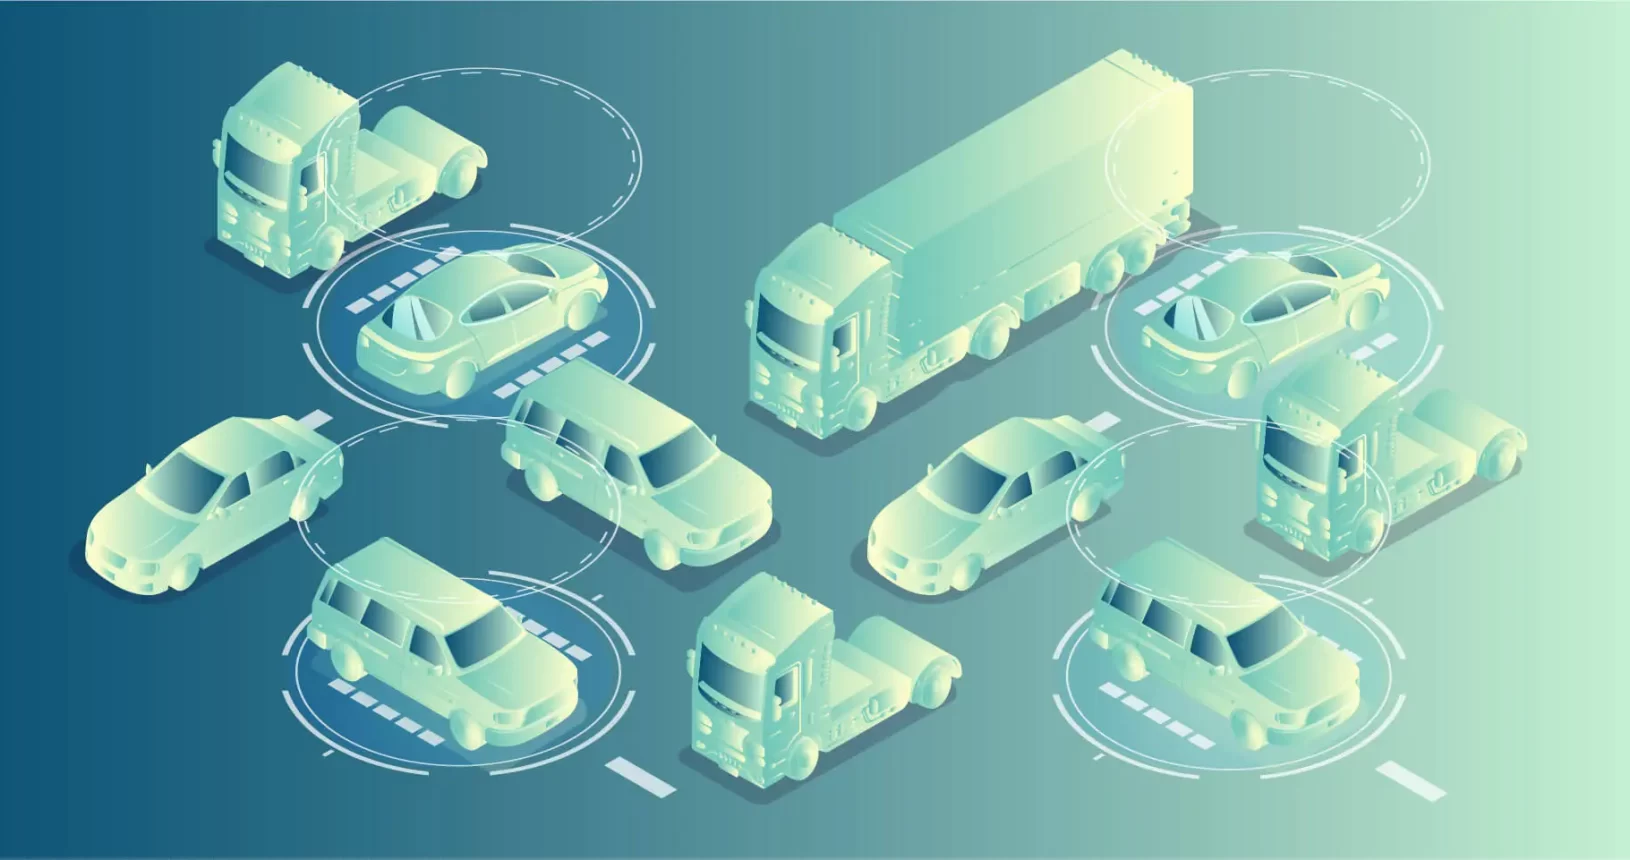 The-benefits-of-managing-your-fleet-with-cloud-software-and-the-Internet-of-Things-_IoT__2-kopia-16